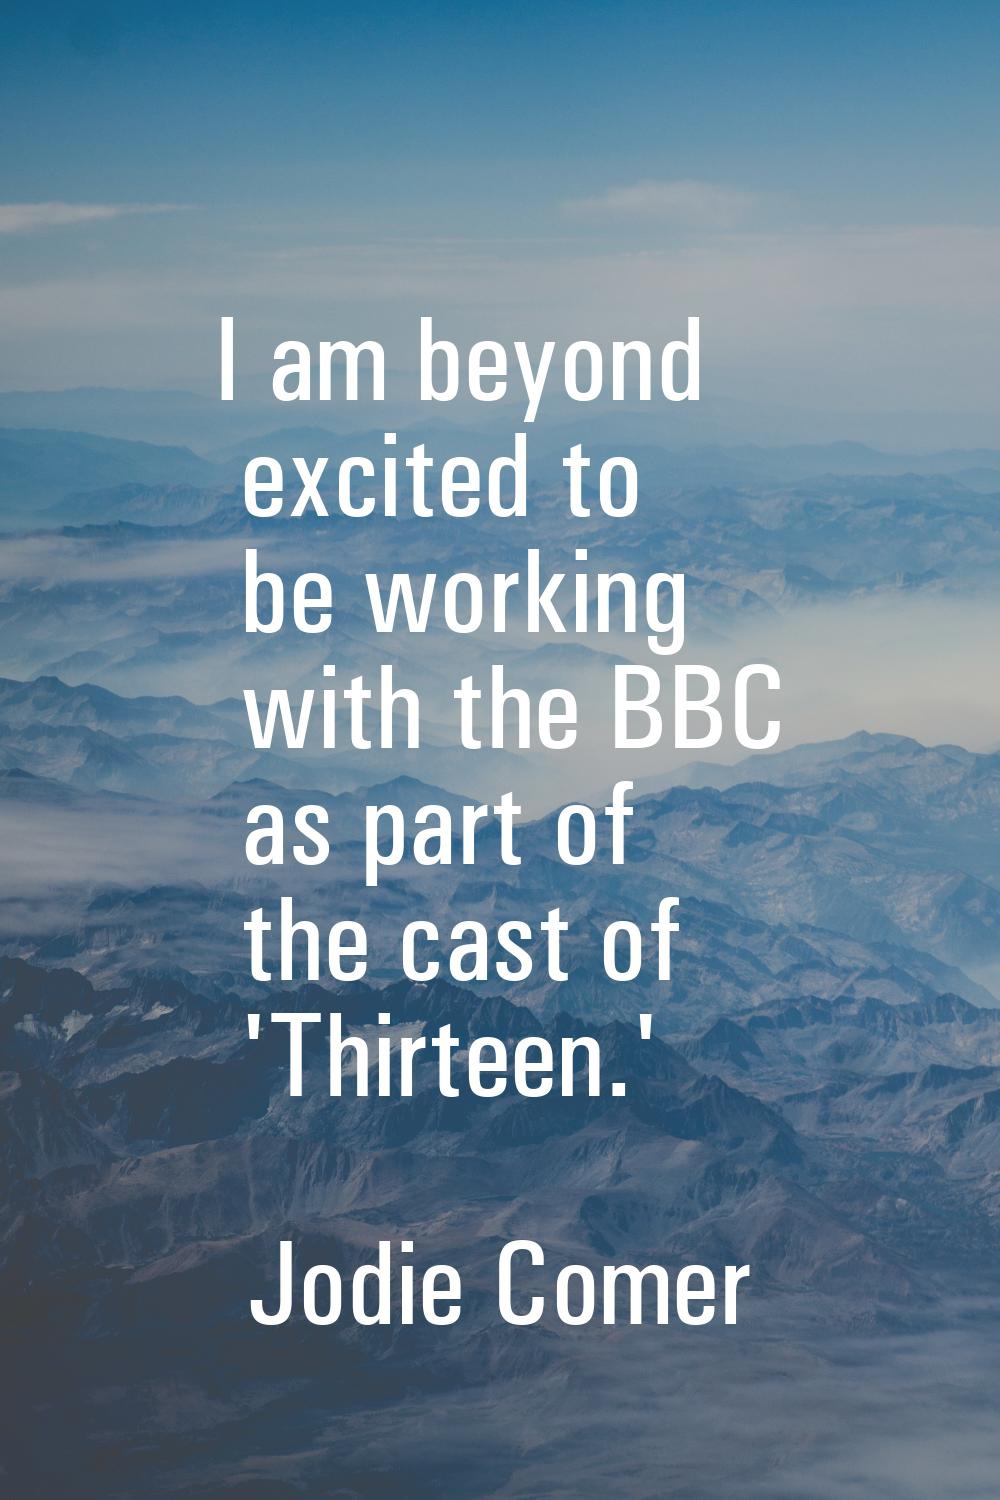 I am beyond excited to be working with the BBC as part of the cast of 'Thirteen.'